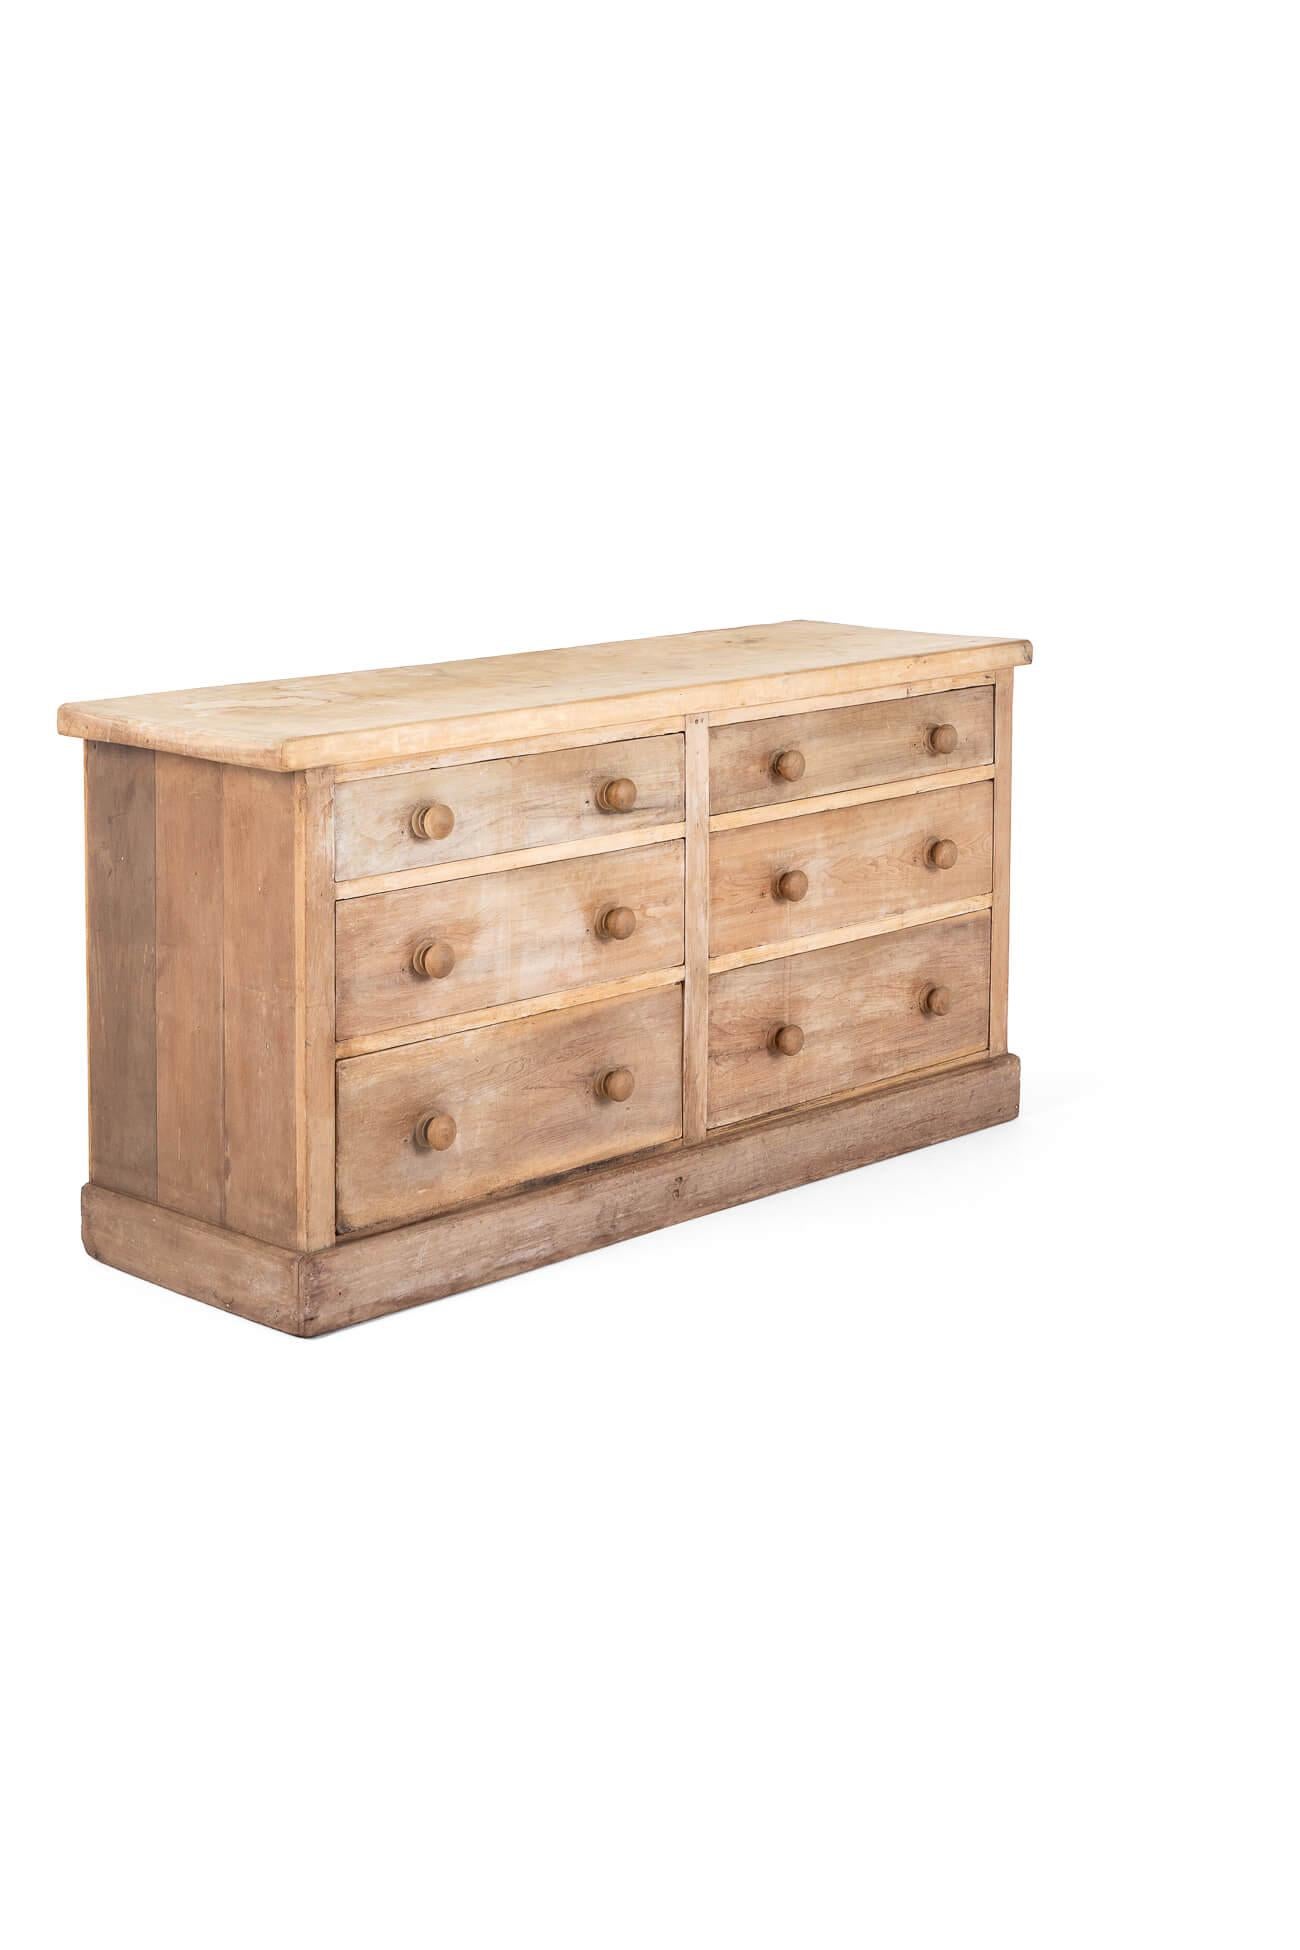 A large Victorian pine cabinet made of up of six deep  smooth running drawers.

Each drawer has two large original wooden knobs perfect for maximum storage solutions.

The top is made of a large thick oak slab top beautifully and naturally weathered